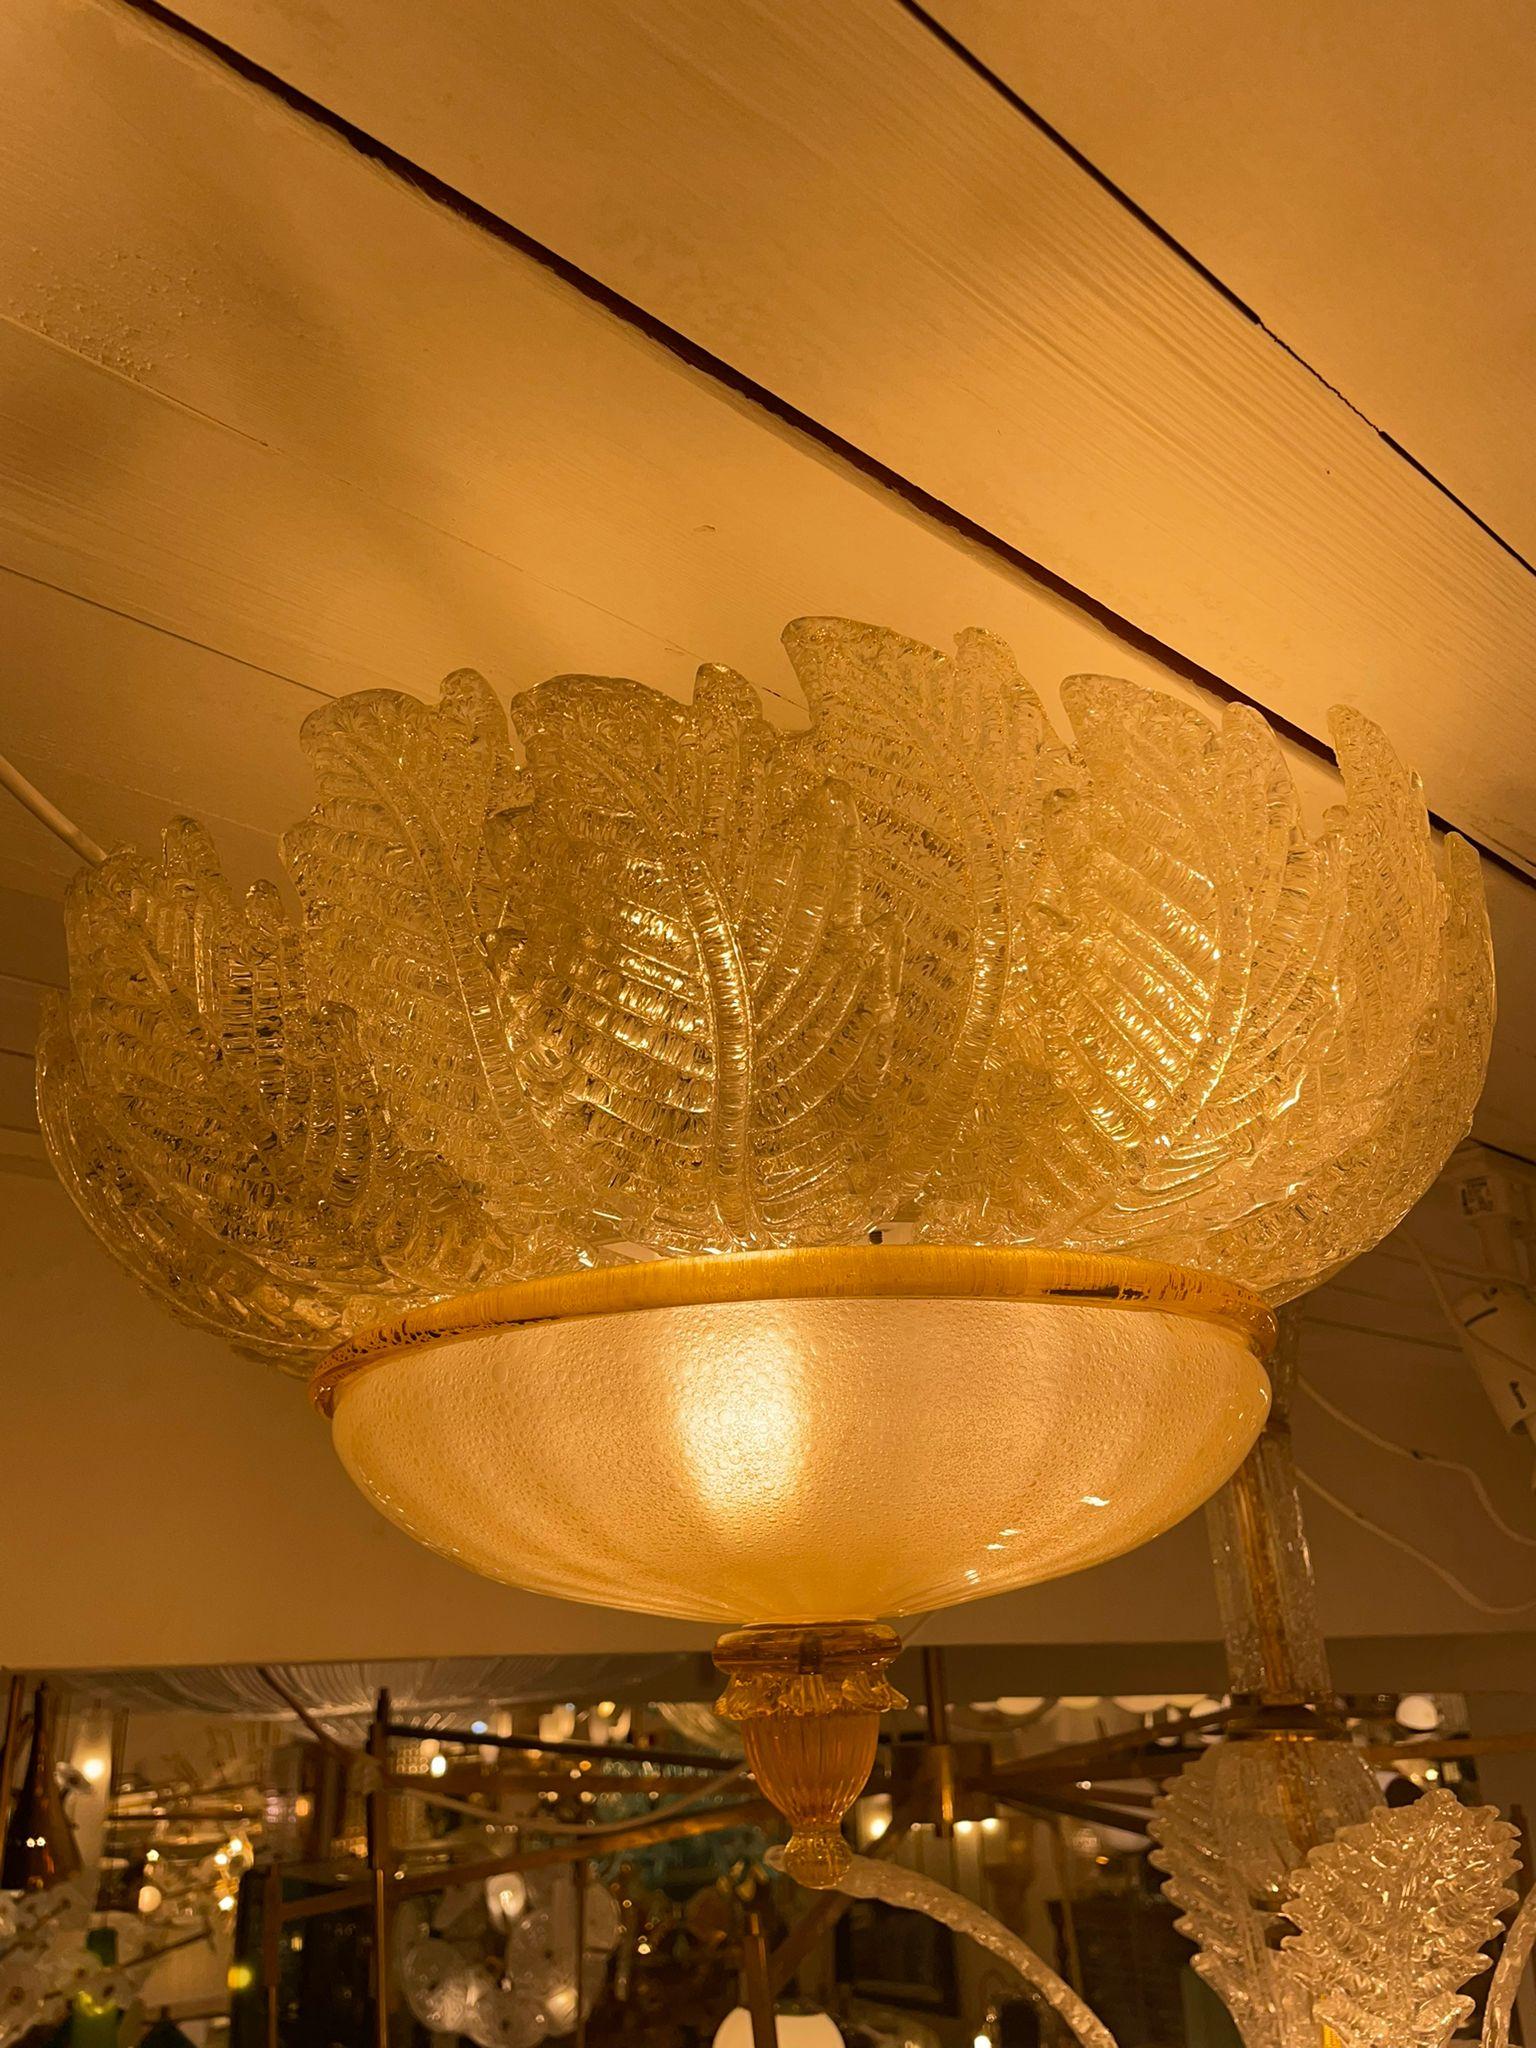 Barovier Flower Ceiling Lamp Murano with Gold Inclusion, Italy 1930s In Excellent Condition For Sale In London, GB